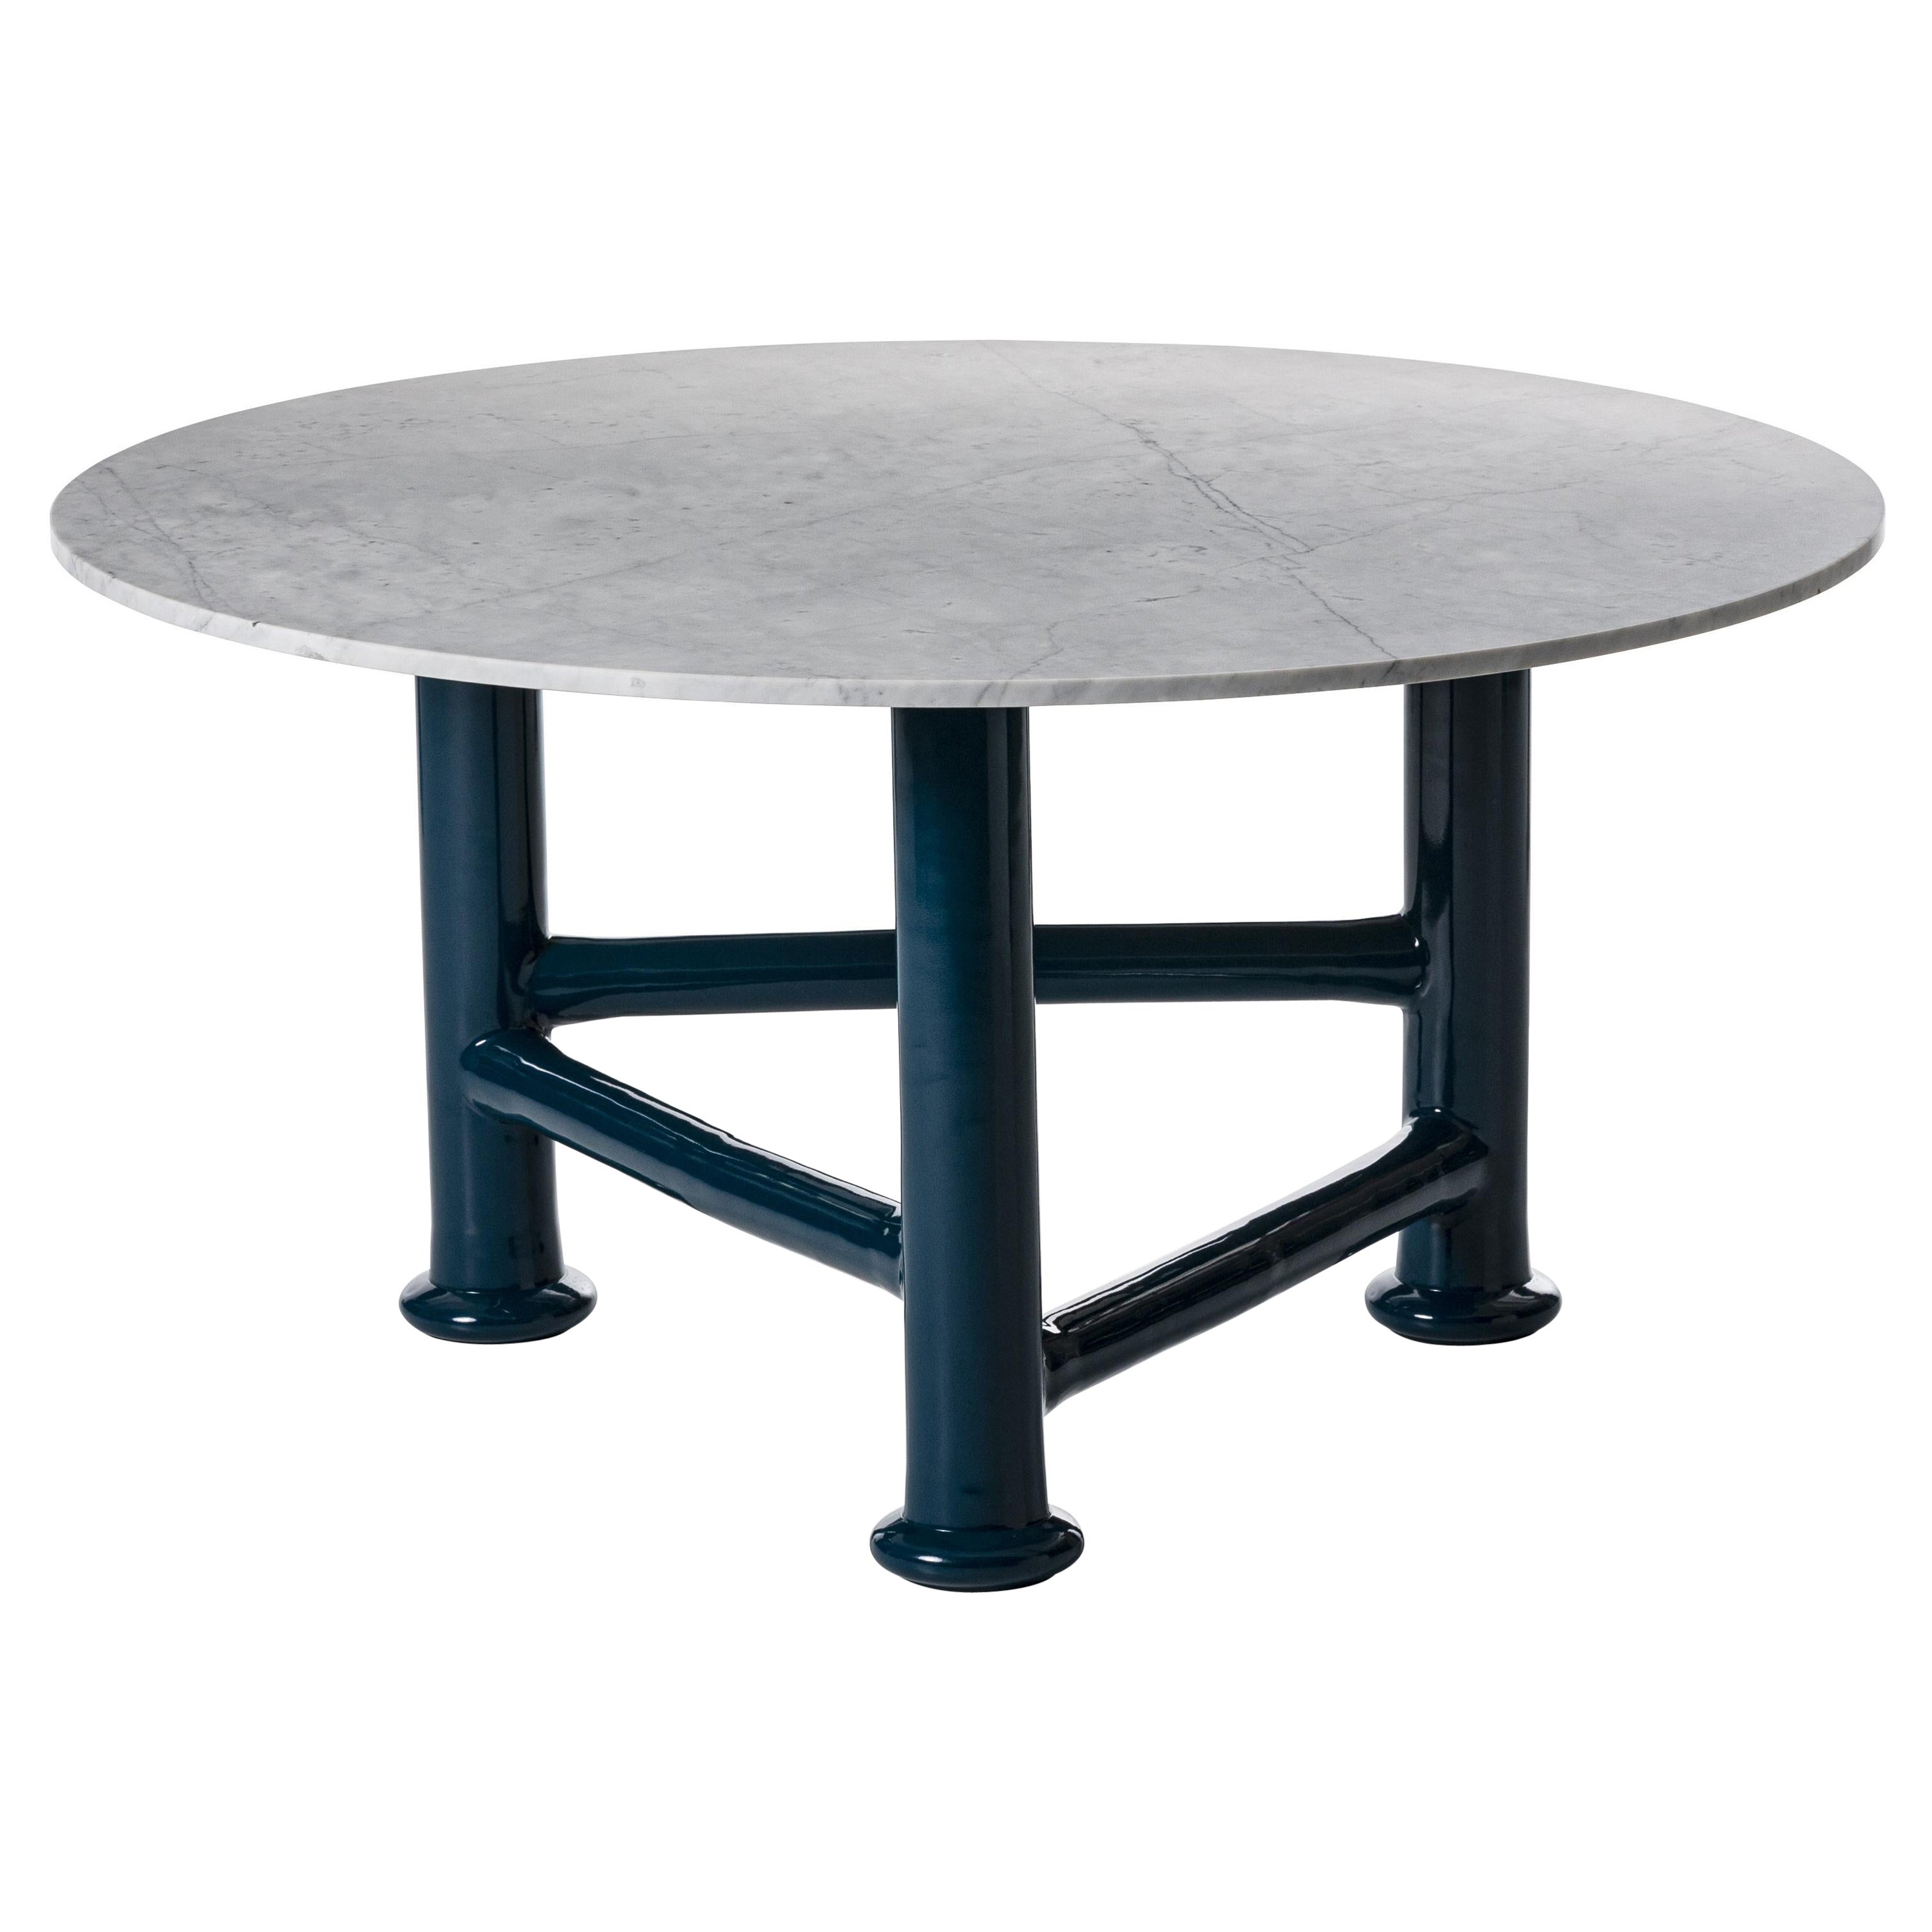 Gervasoni Next 32 Ocean Lacquered Table with Carrara Marble Top by Paola Navone